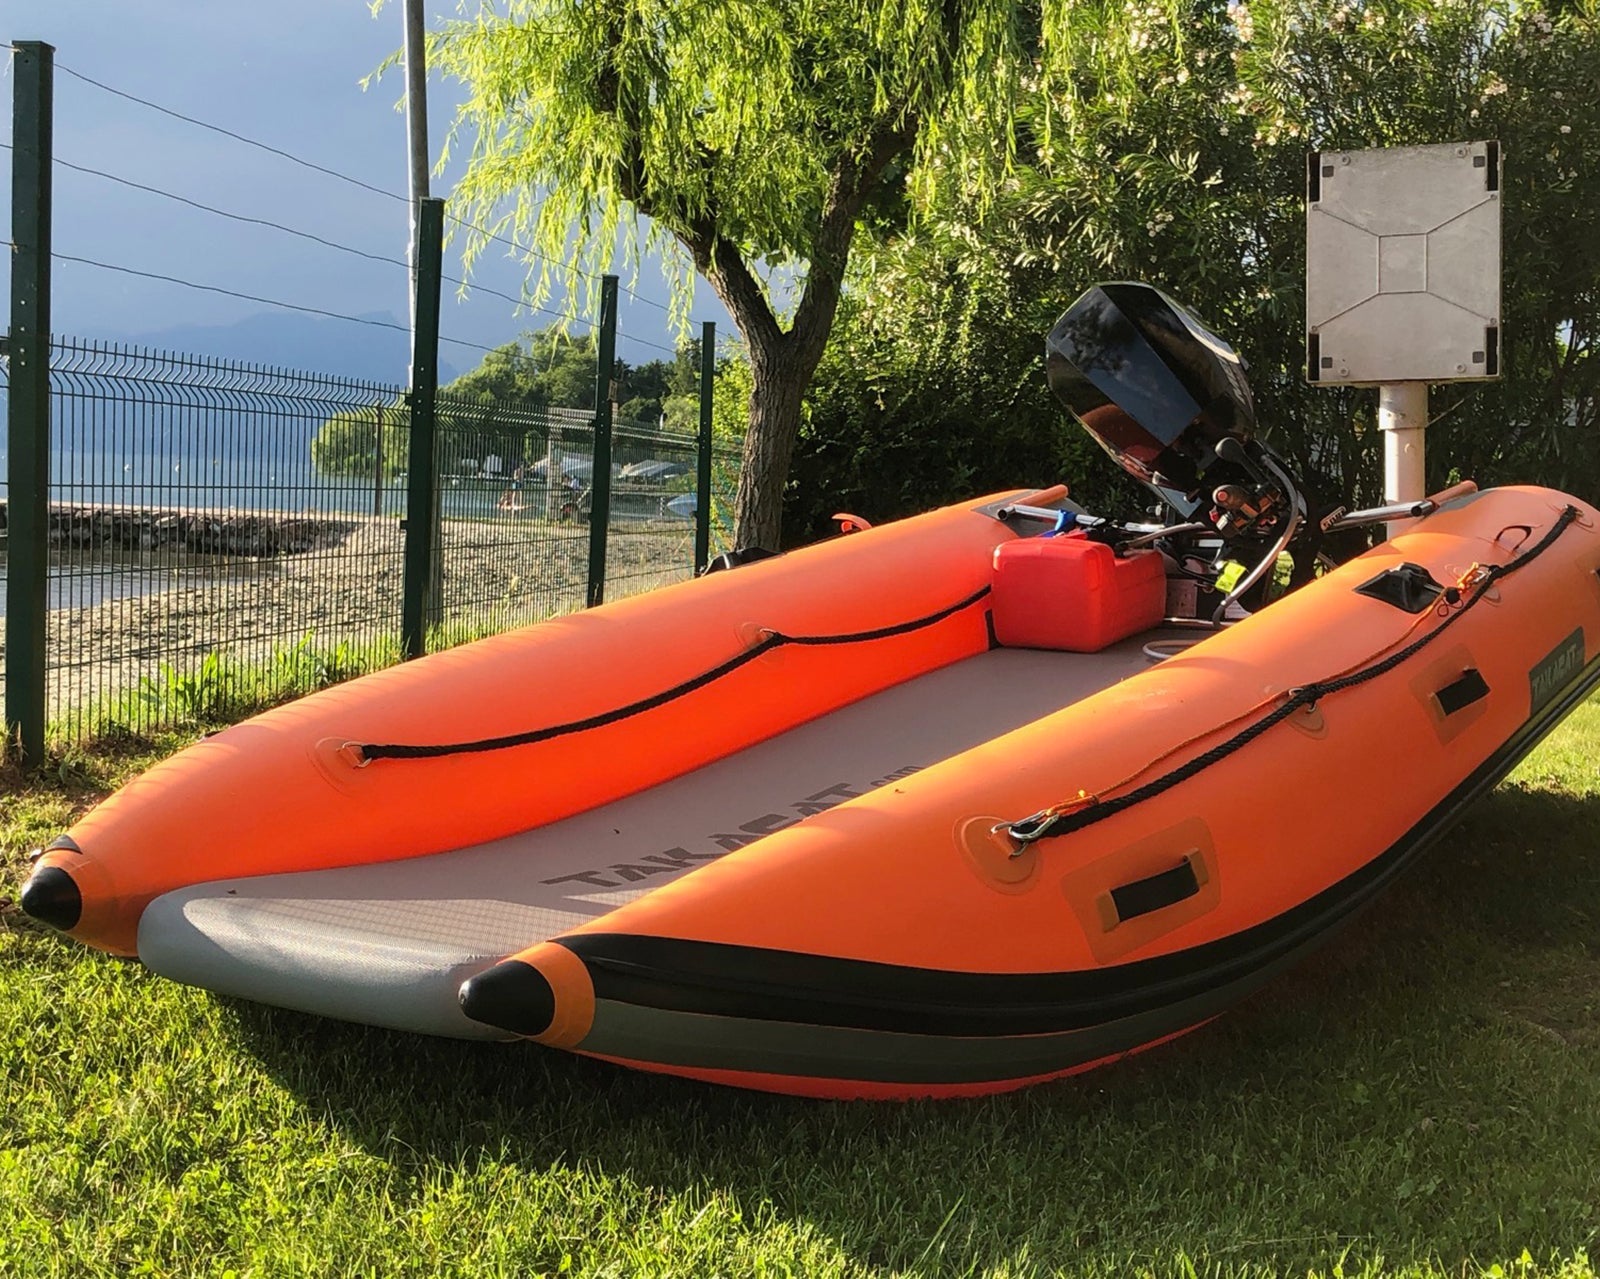 Takacat 420 LX Portable Inflatable Boat